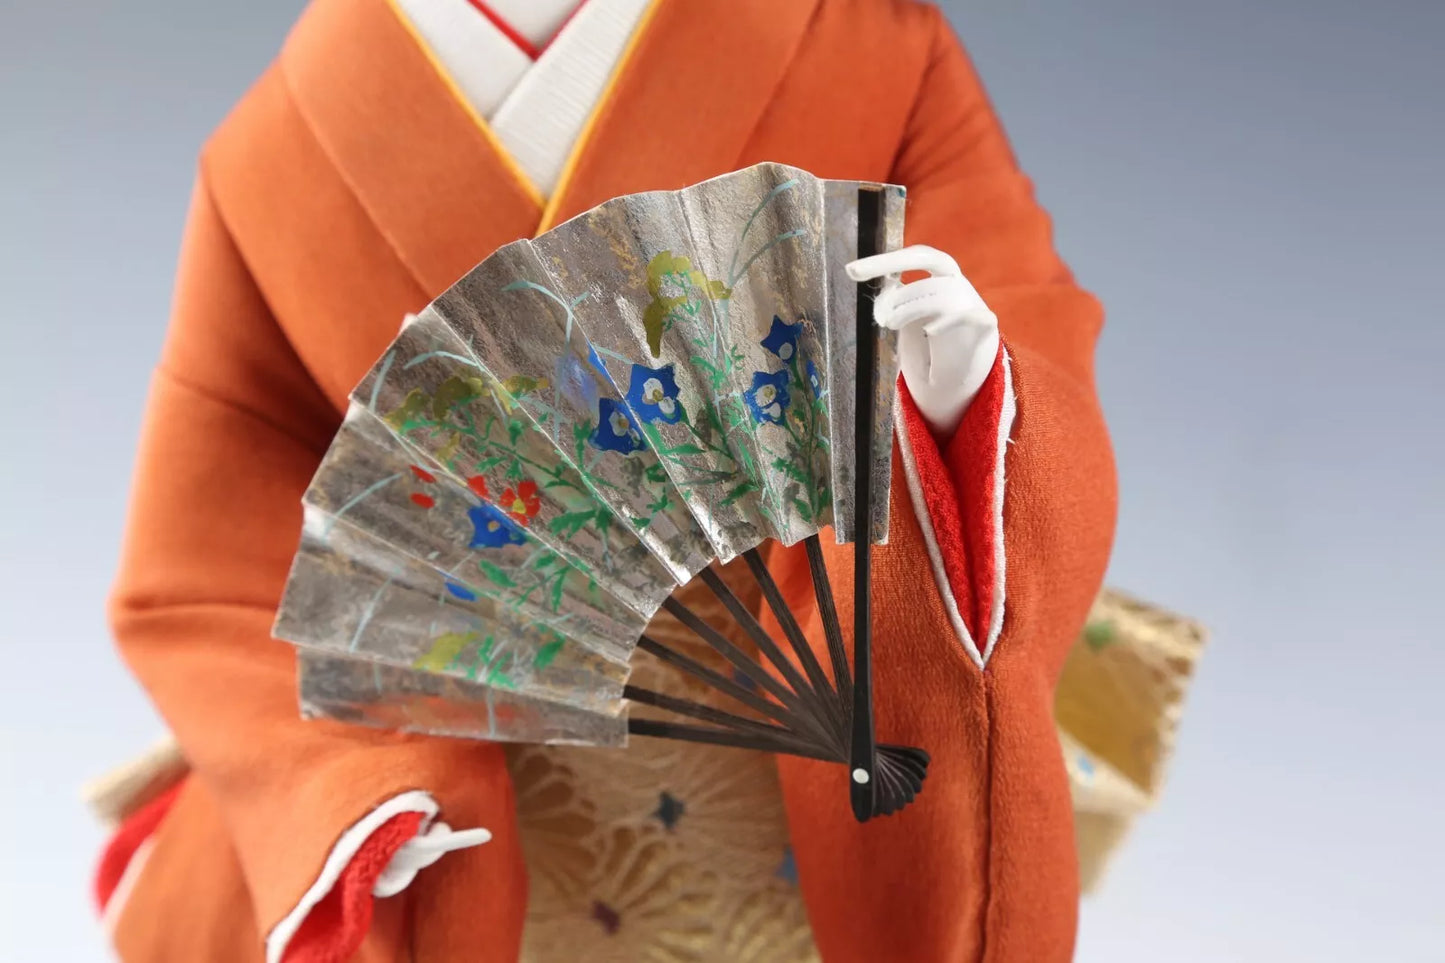 Royal Style Japanese Geisha Doll with Fan Vintage Asian Art Collectible Decor from Showa Period.